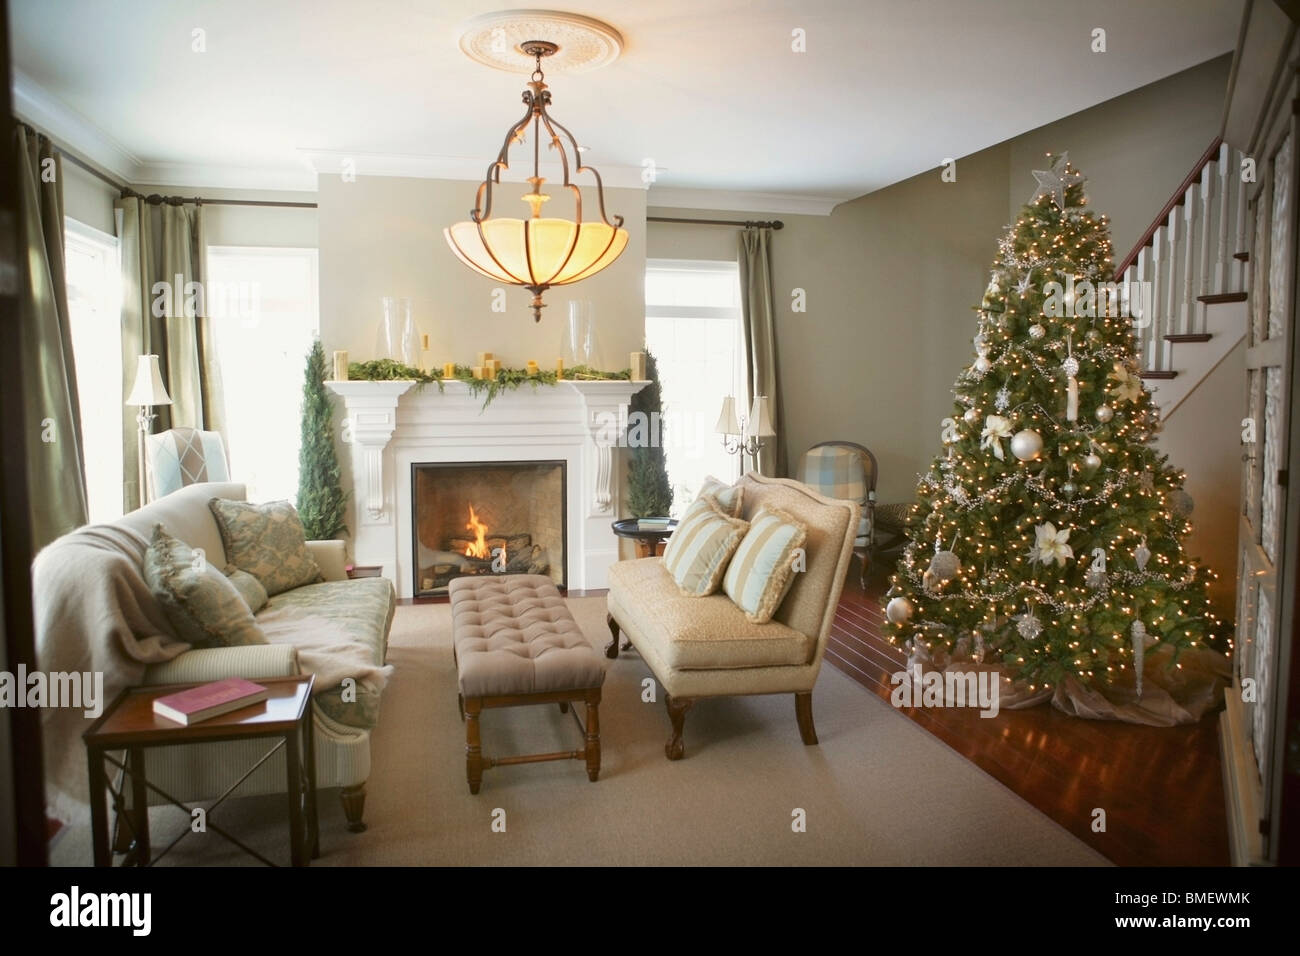 Living Room With A Christmas Tree Stock Photo